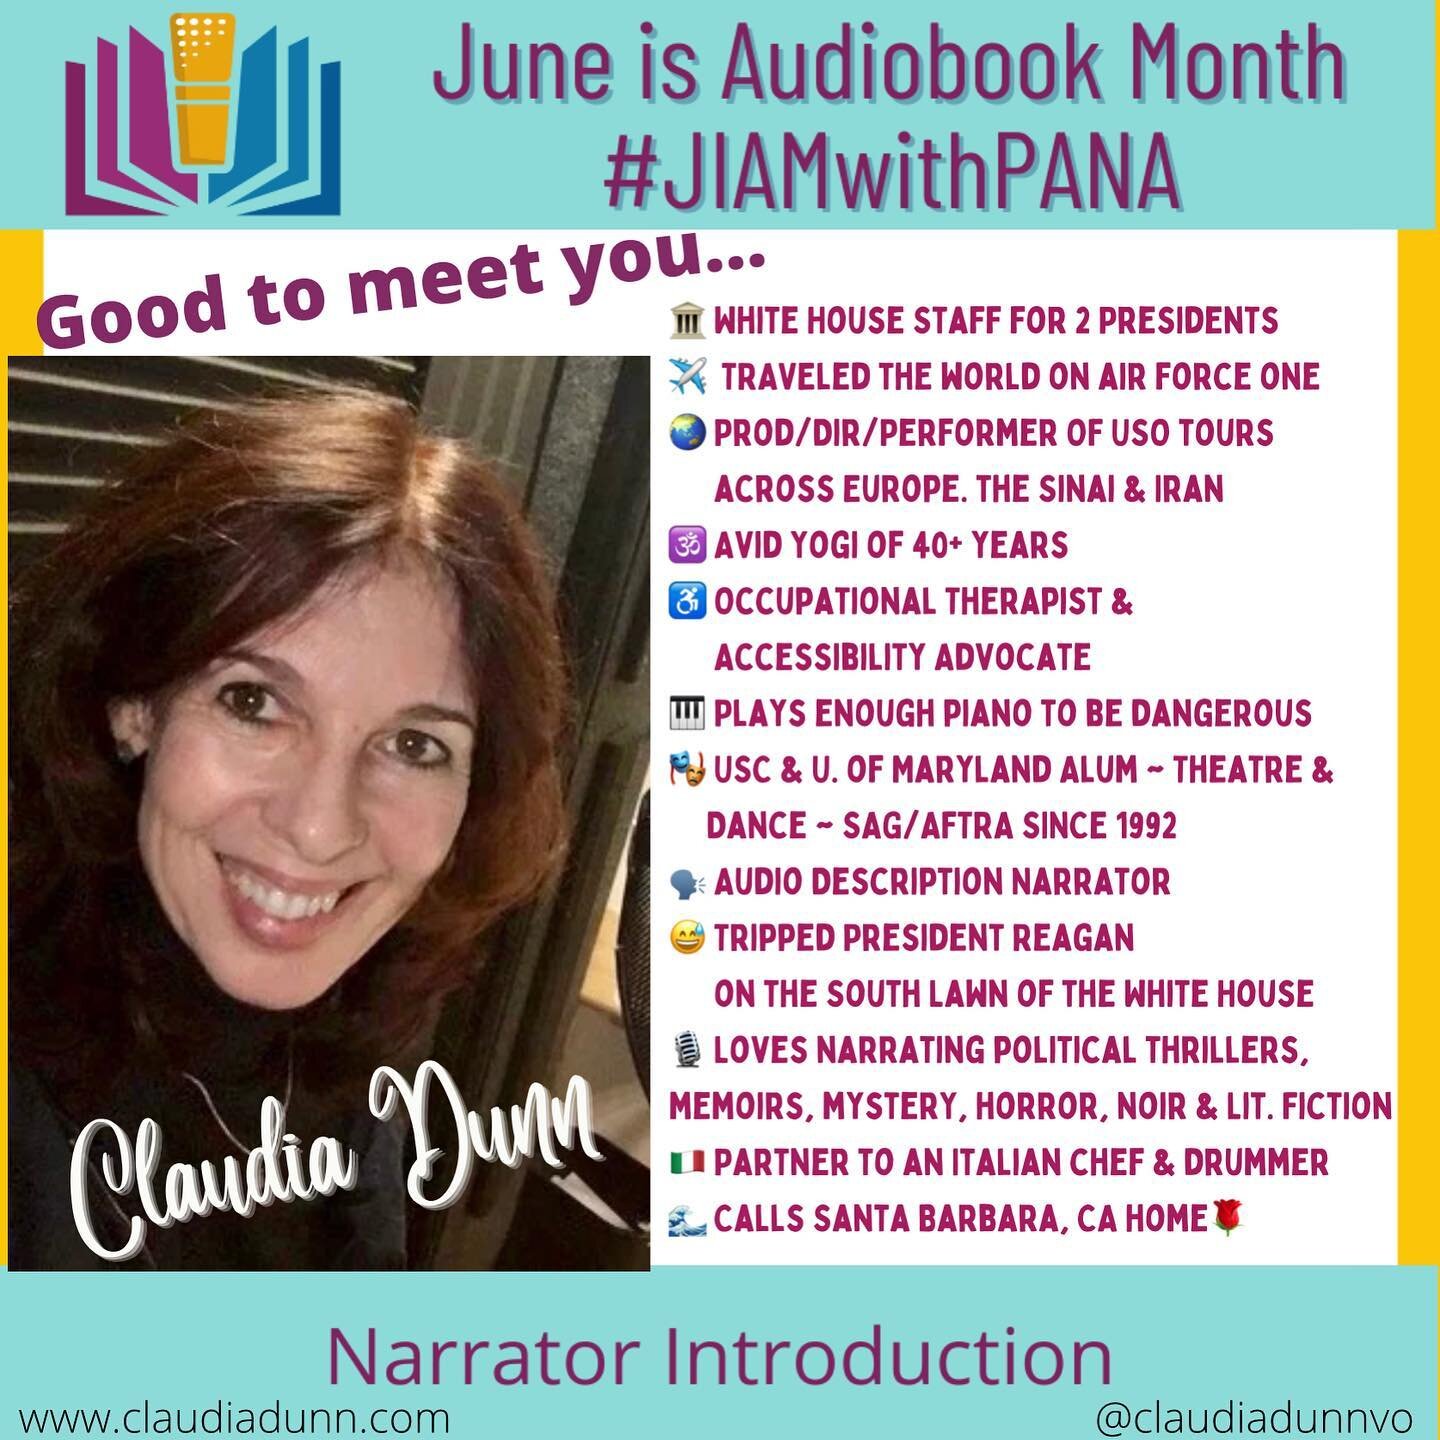 💫📚June is Audiobook Month! 
Joining in the celebration!📚💫

#jiam #jiamwithpana #audiobooknarrator #audiobookmonth #juneisaudiobookmonth #narratorinreallife 📚💫